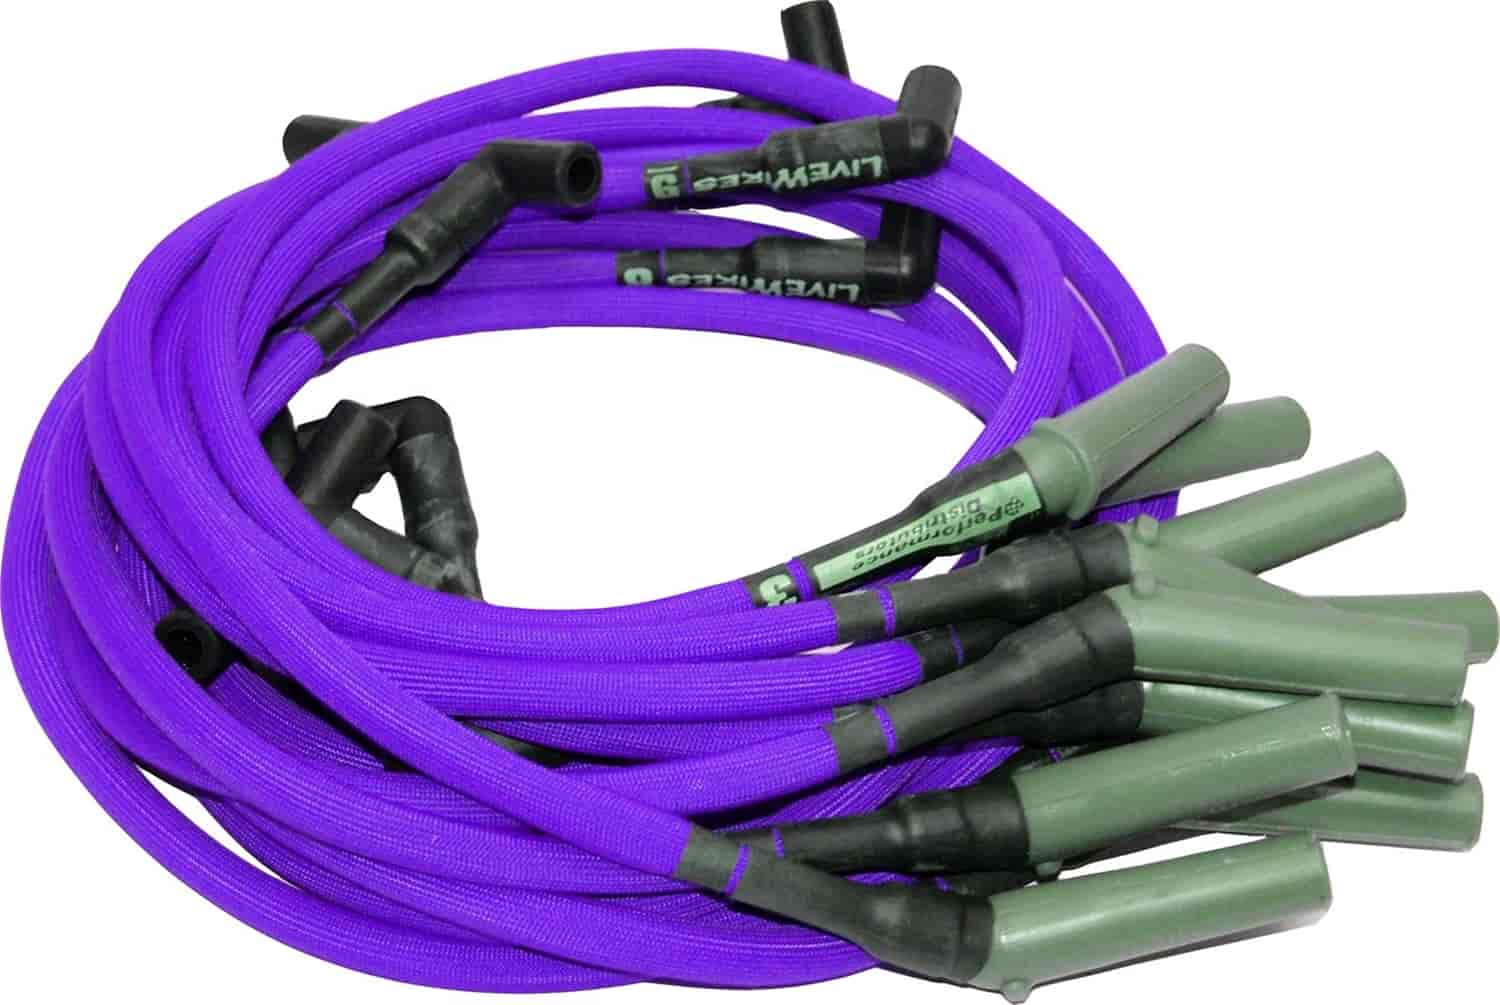 Live Wires Spark Plug Wires 1987-1996 Small Block Chevy V8, Under Headers - Purple